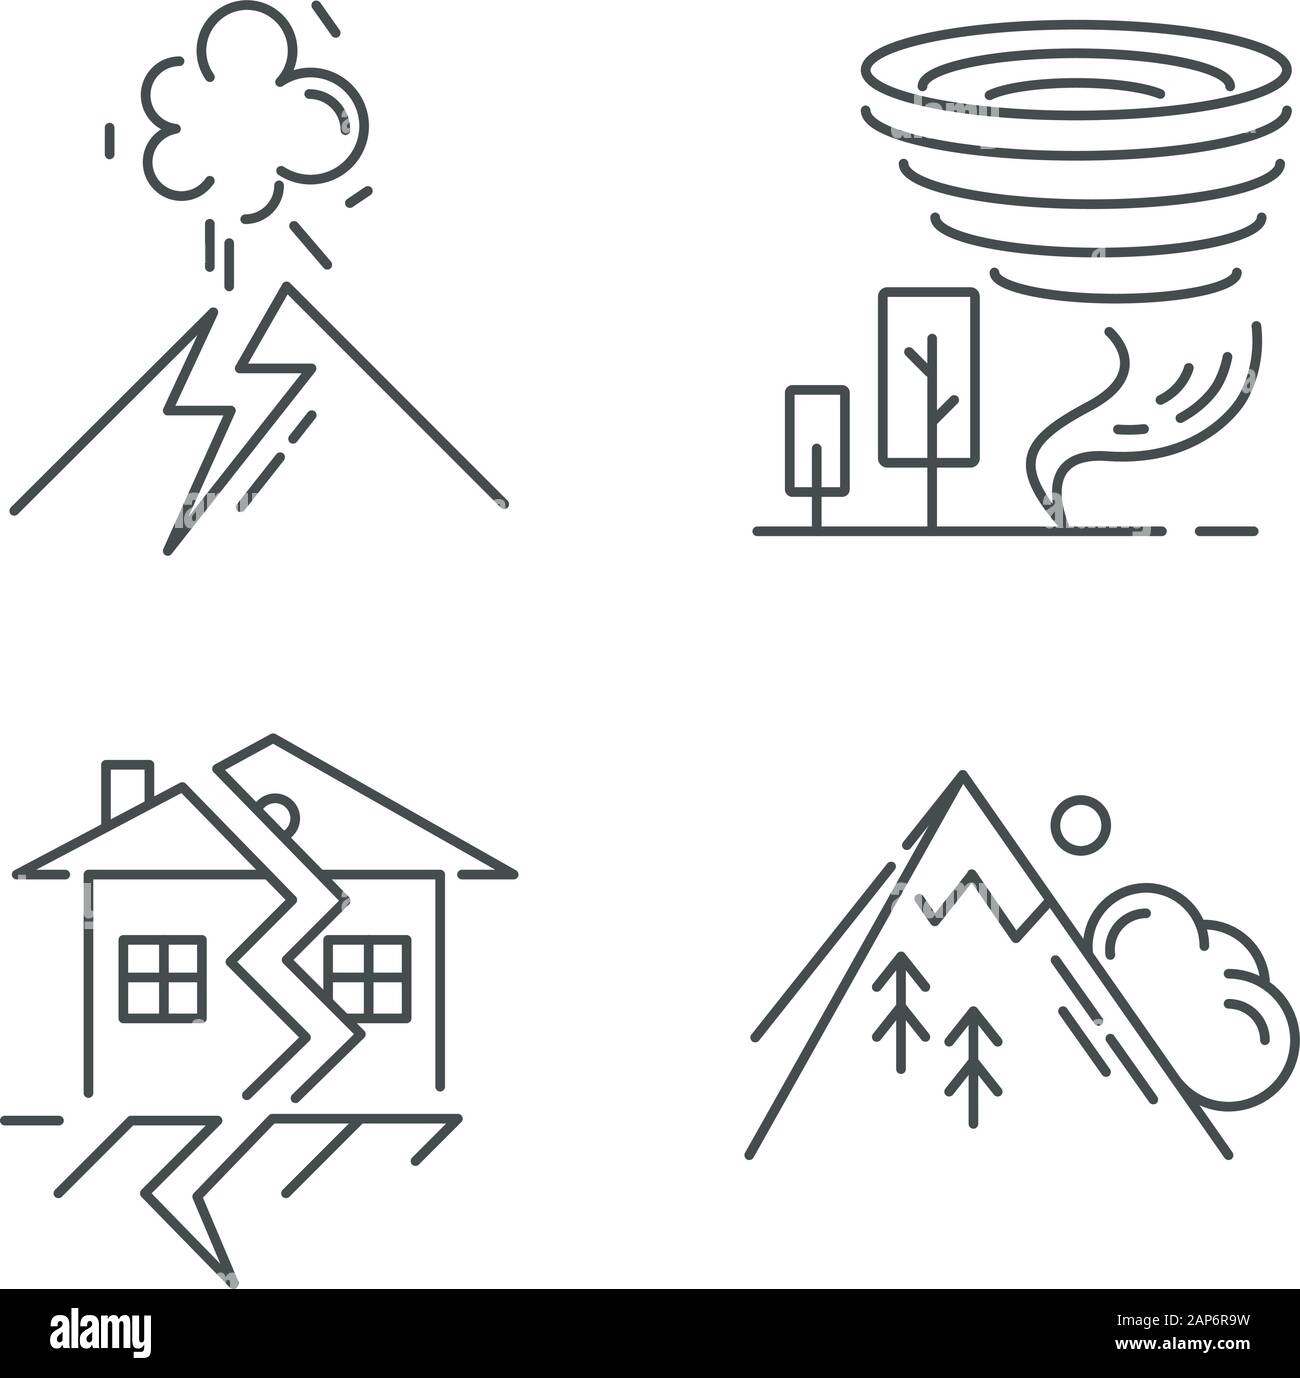 Share 133+ natural hazard drawing latest